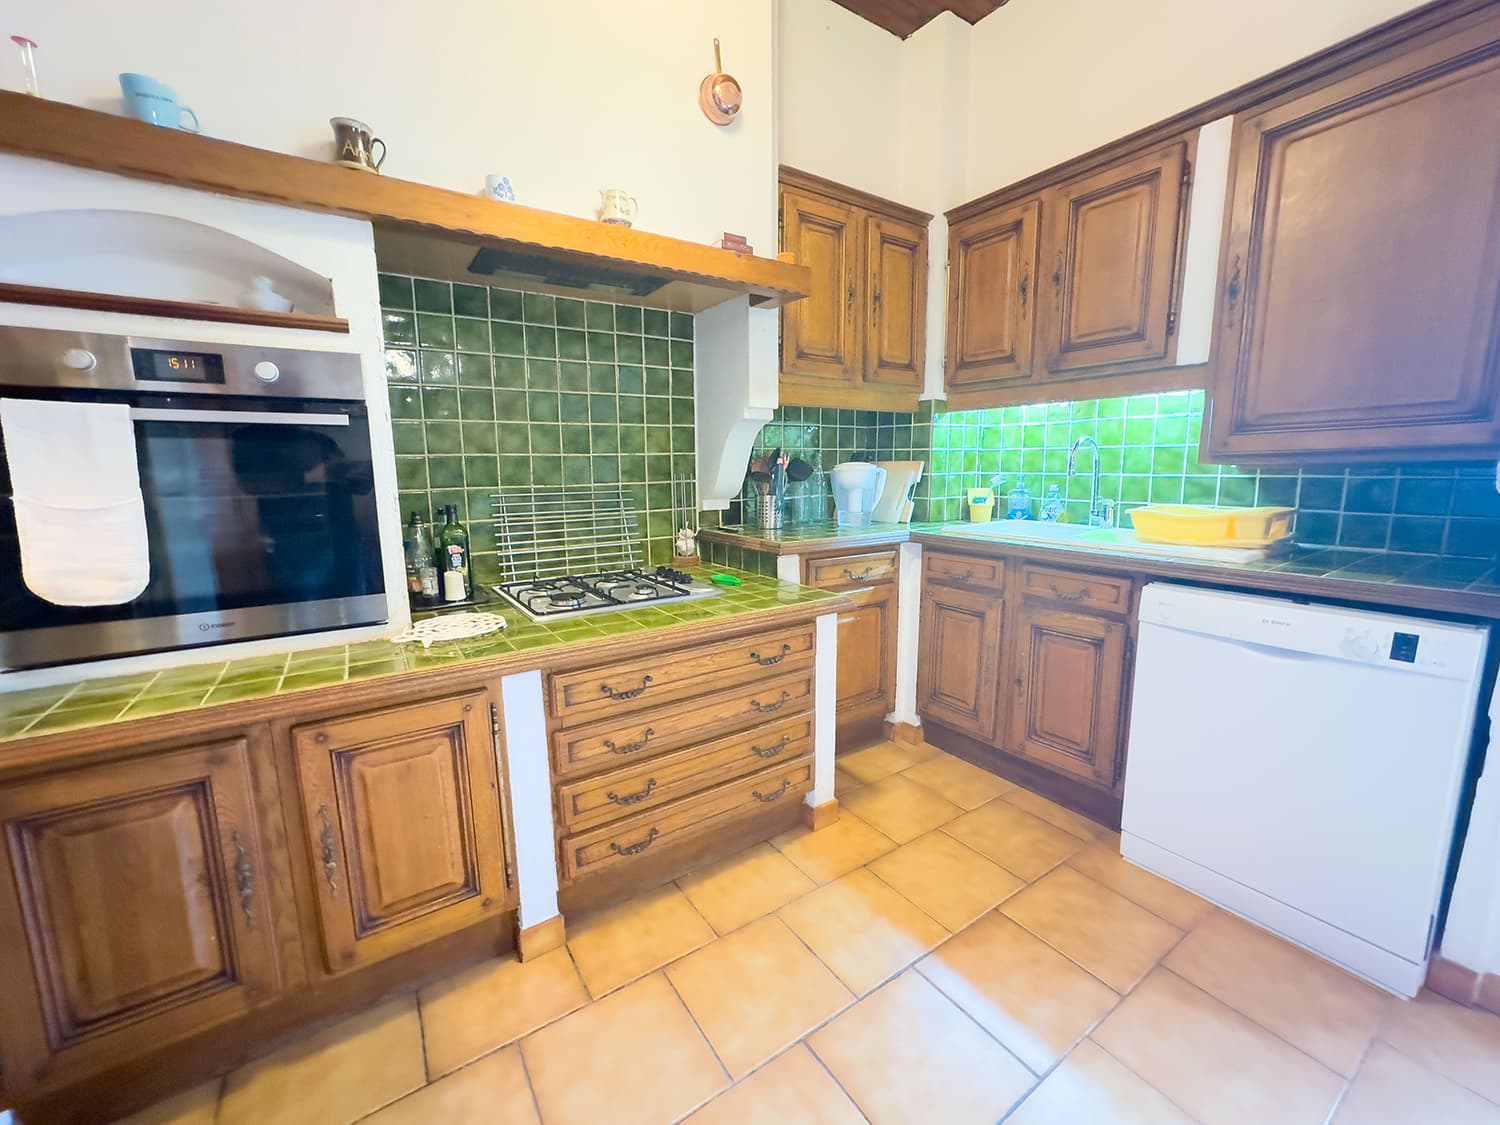 Kitchen | Holiday home in Aude